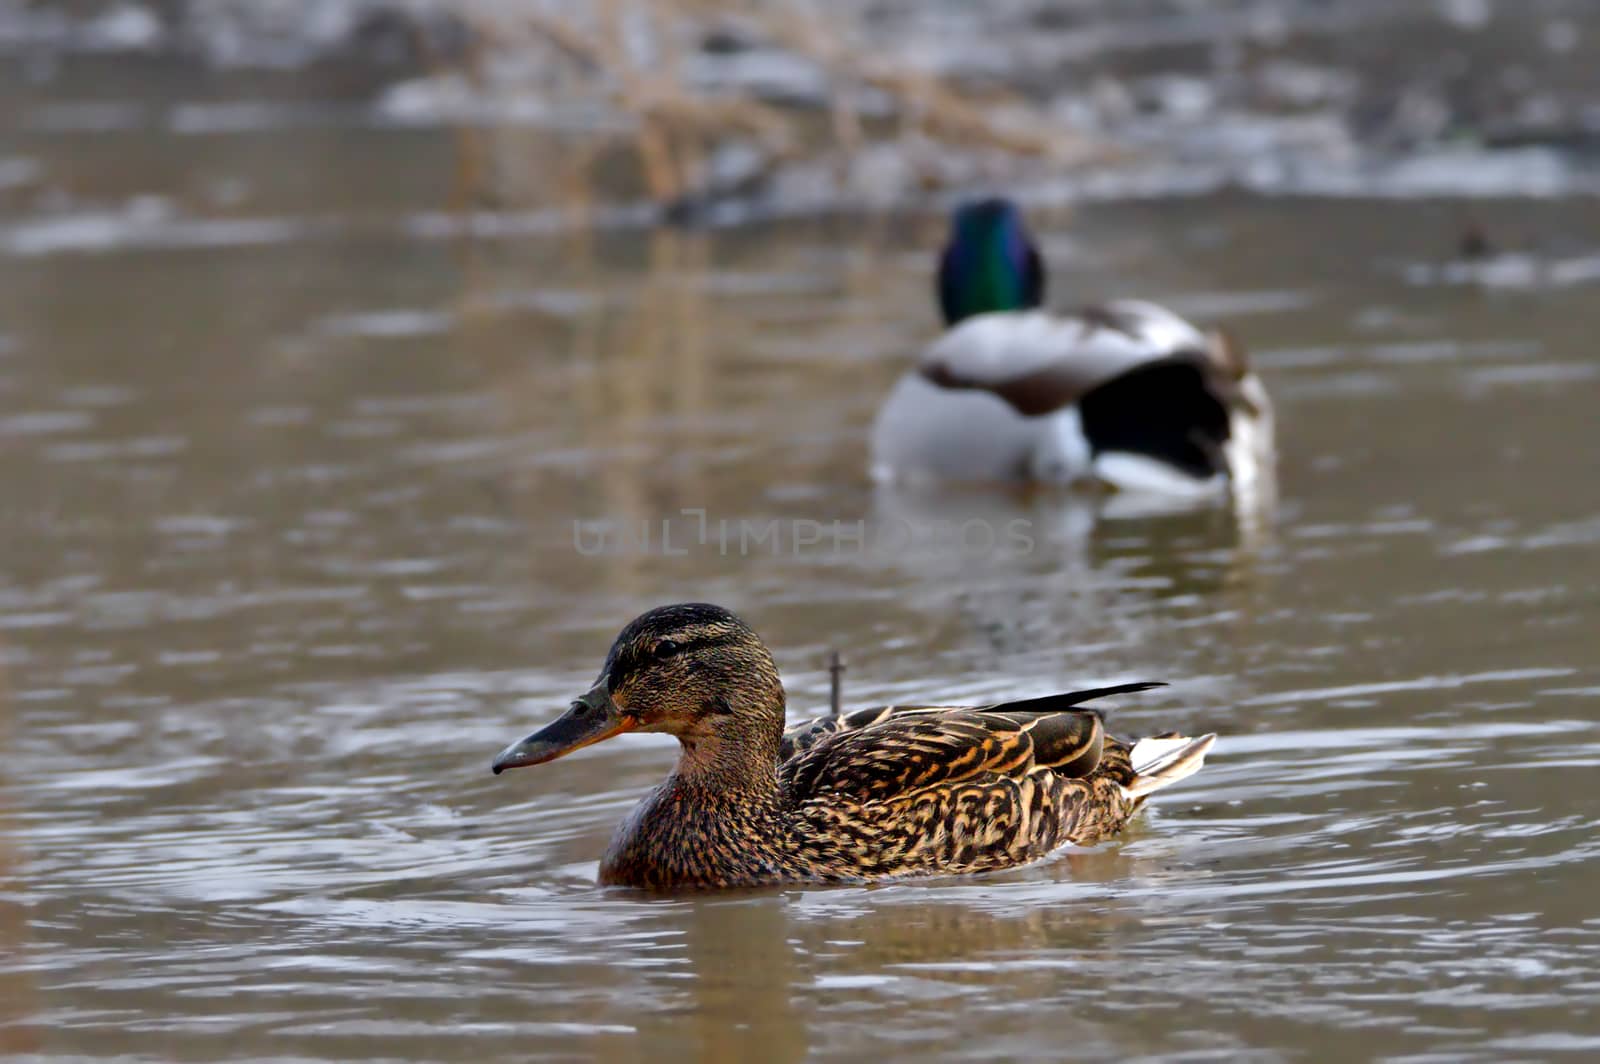 Two ducks swimming in a pond. Female in focus, male on background.